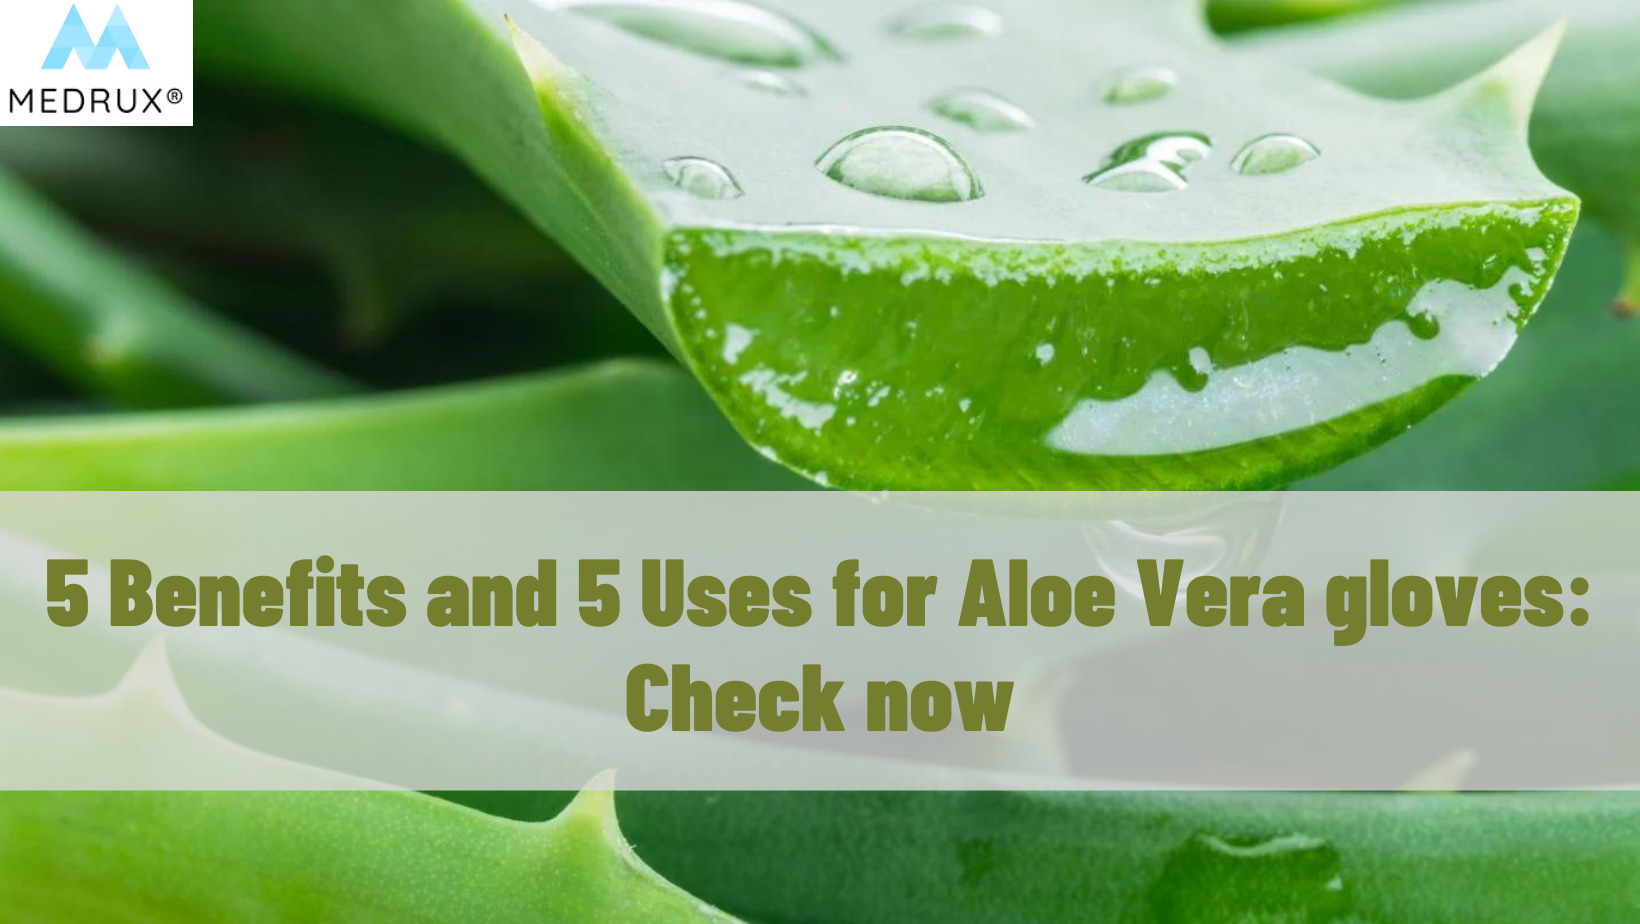 5 Benefits and 5 Uses for Aloe Vera gloves: Check now - Medrux